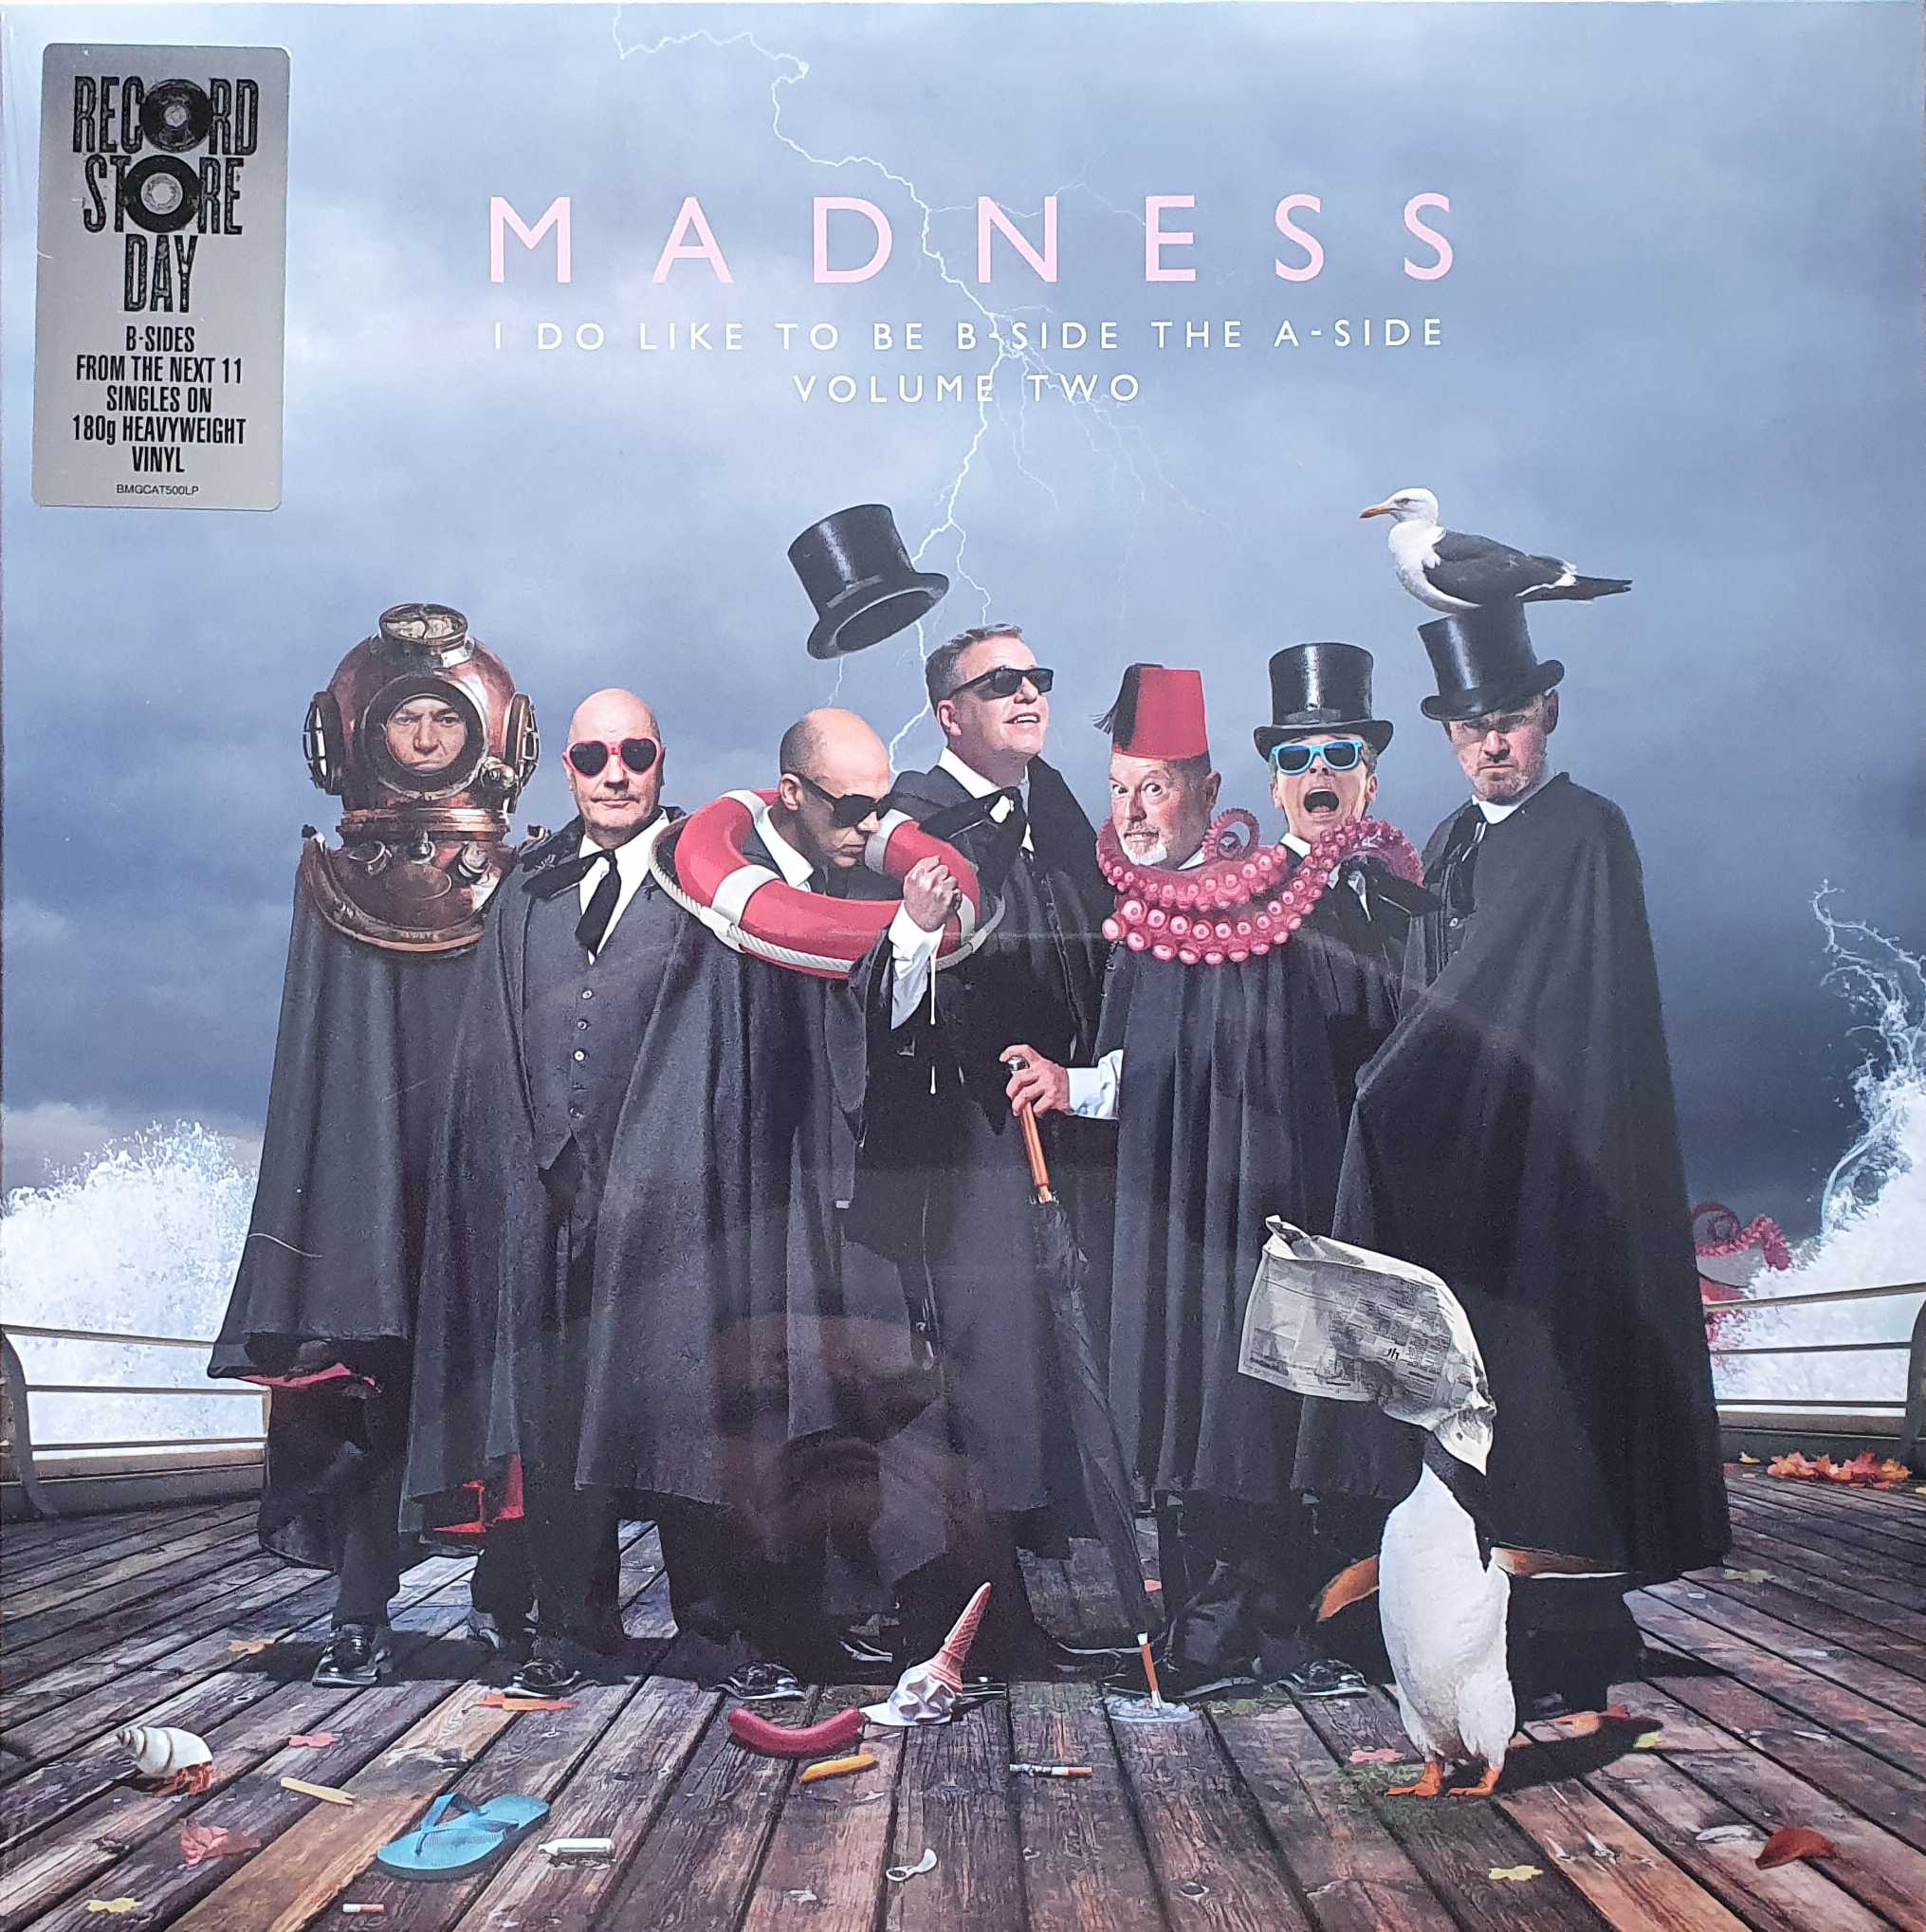 Picture of I do like to be b-side the a-side - Volume 2 by artist Madness 